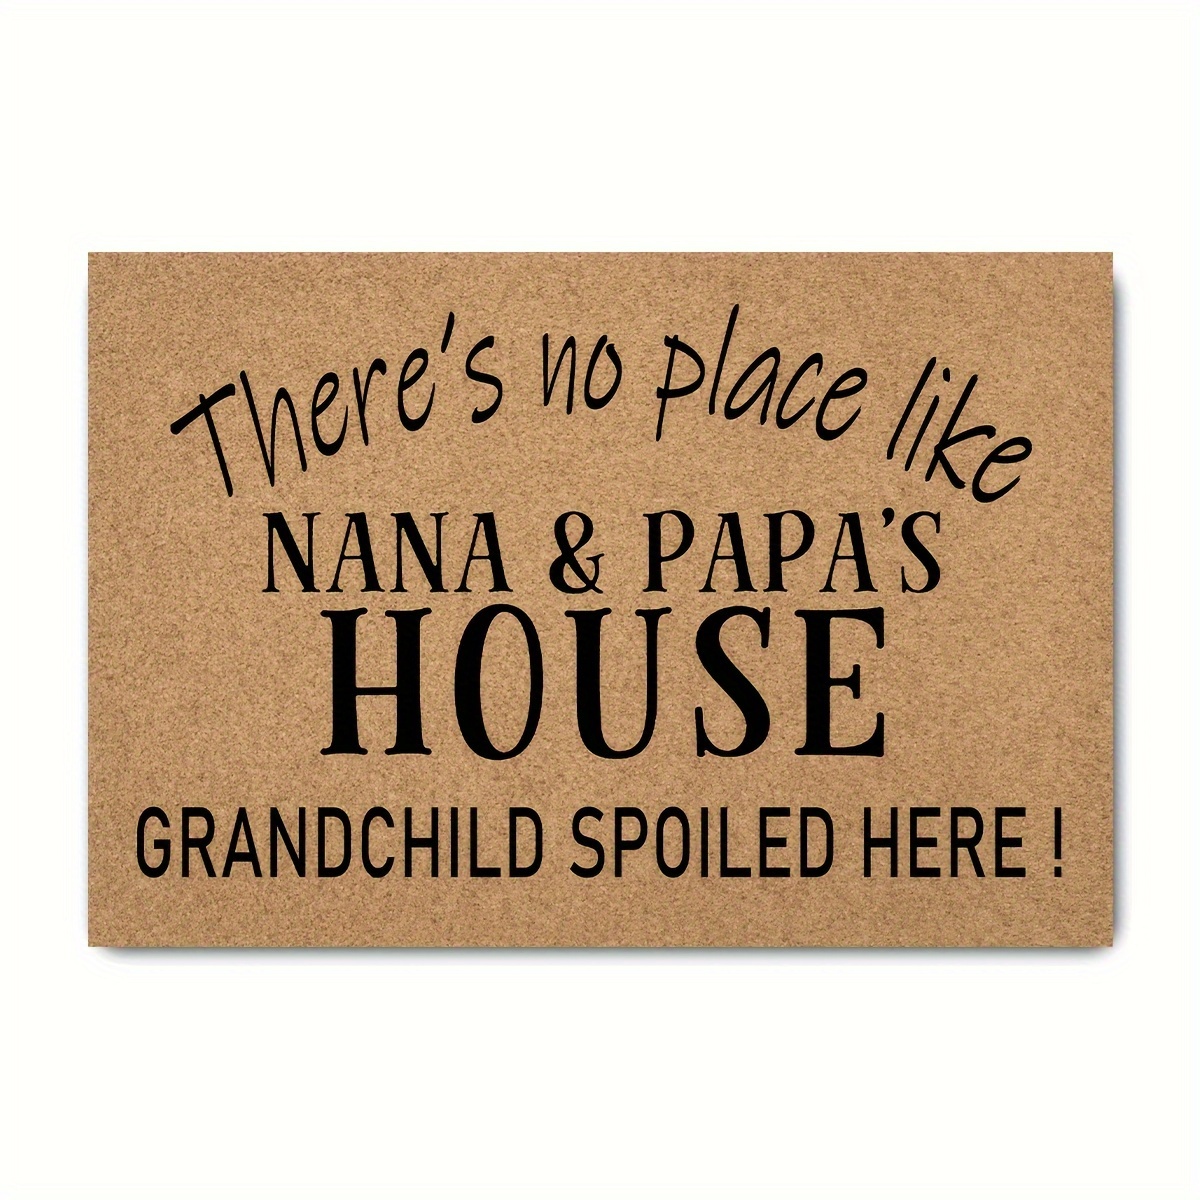 

Funny Welcome Outdoor Decor For Front Porch There's No Place Like Nana&papa's House Grandchild Spoiled Here Monogram Kitchen Rugs And Mats With Anti-slip Rubber Back Novelty Gift Mat (23.7 X 15.9 In)